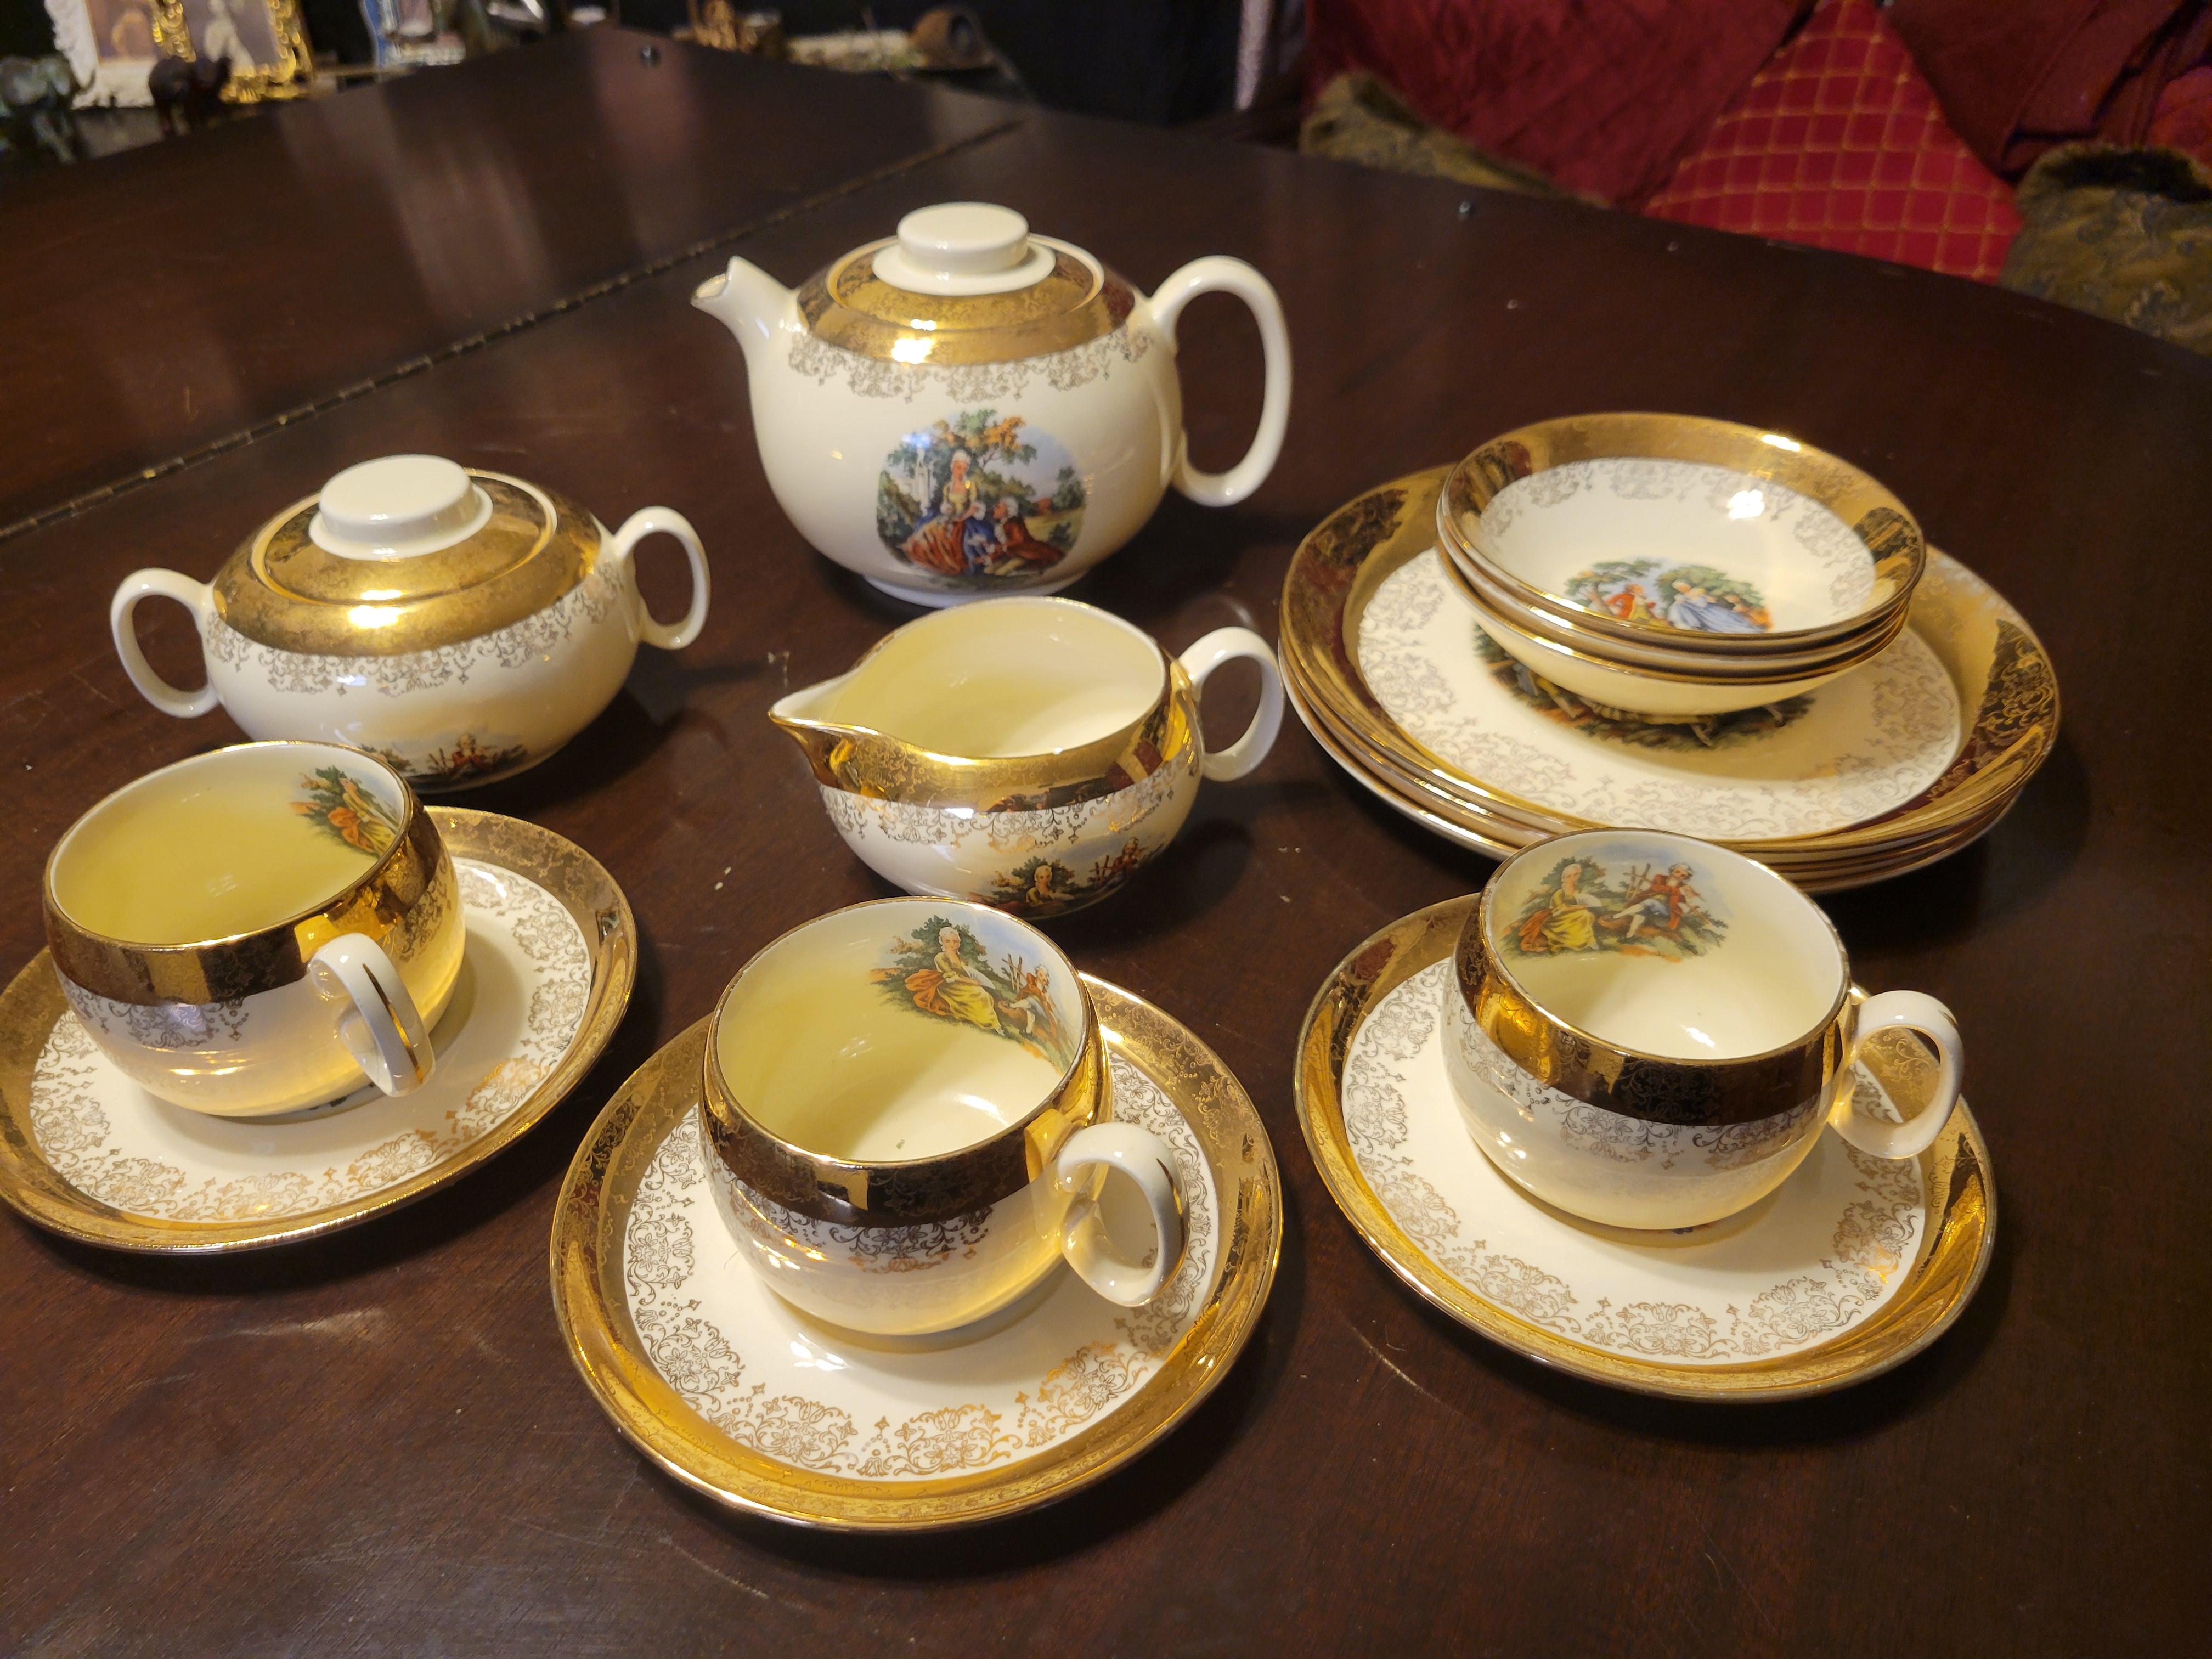 Sabin Crest-o-Gold 22K China Set with Teapot - 15 Pieces For Sale 2